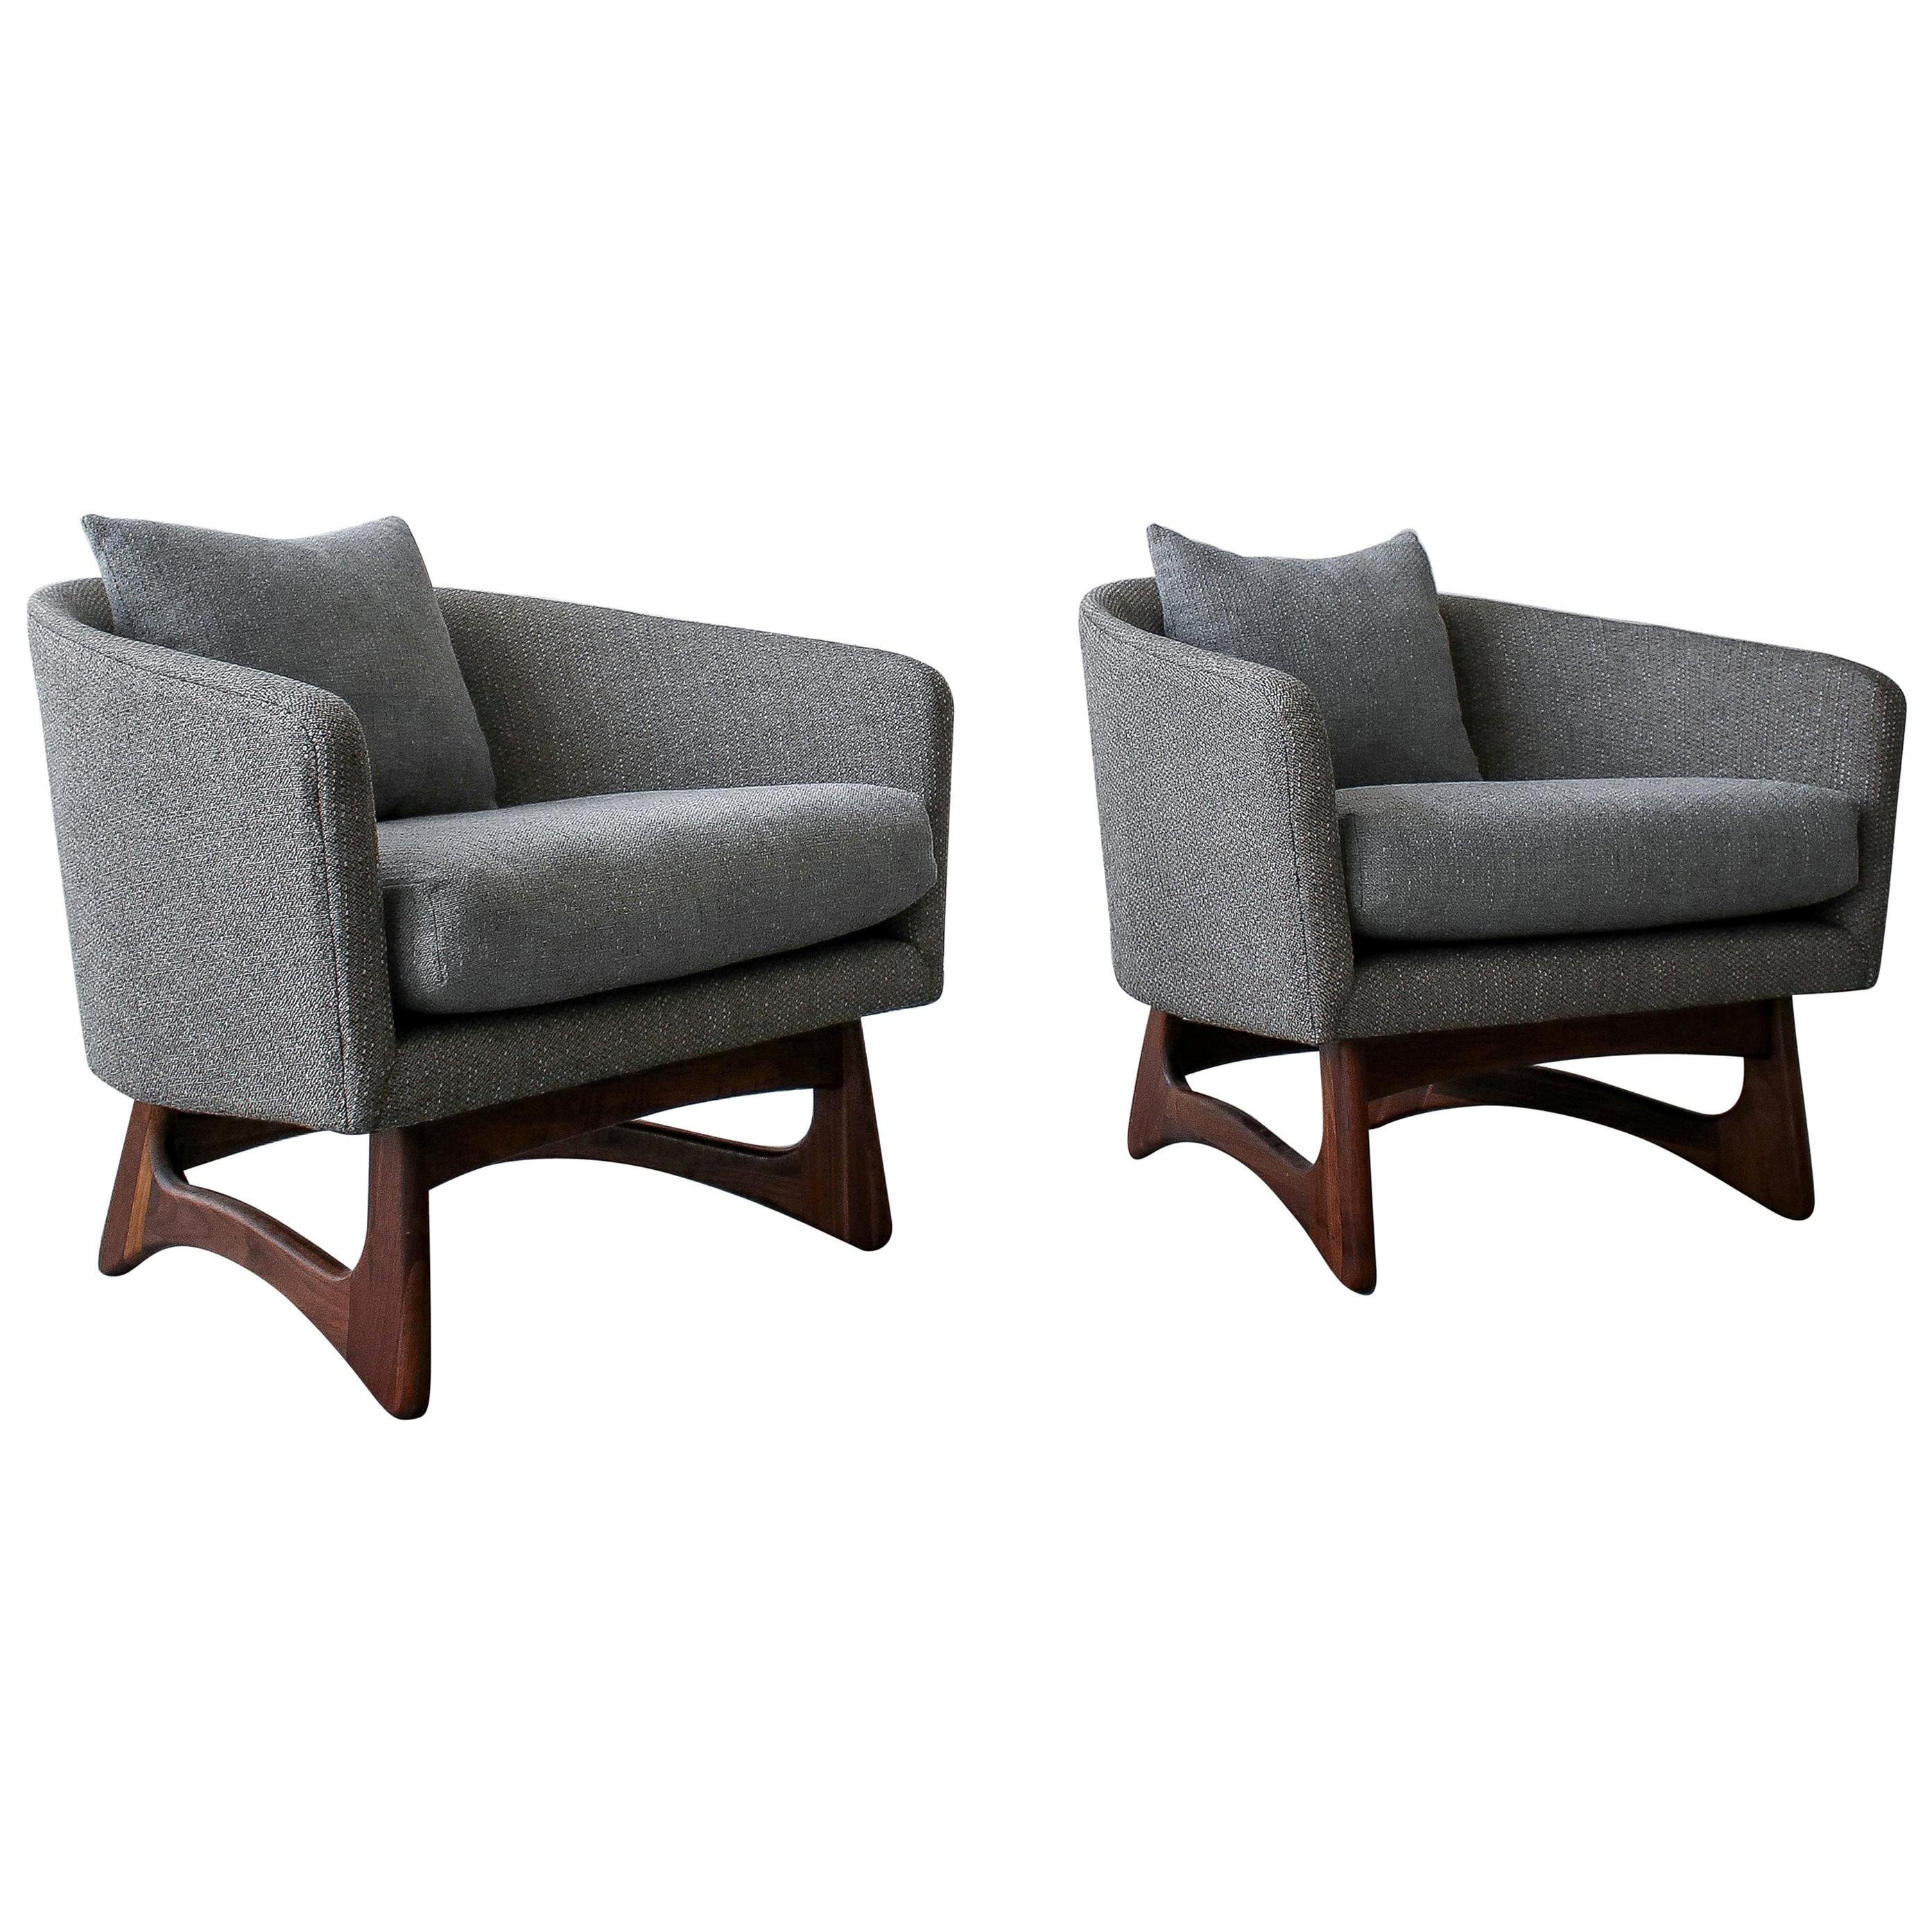 Pair of Midcentury Lounge Chairs by Adrian Pearsall for Craft Associates